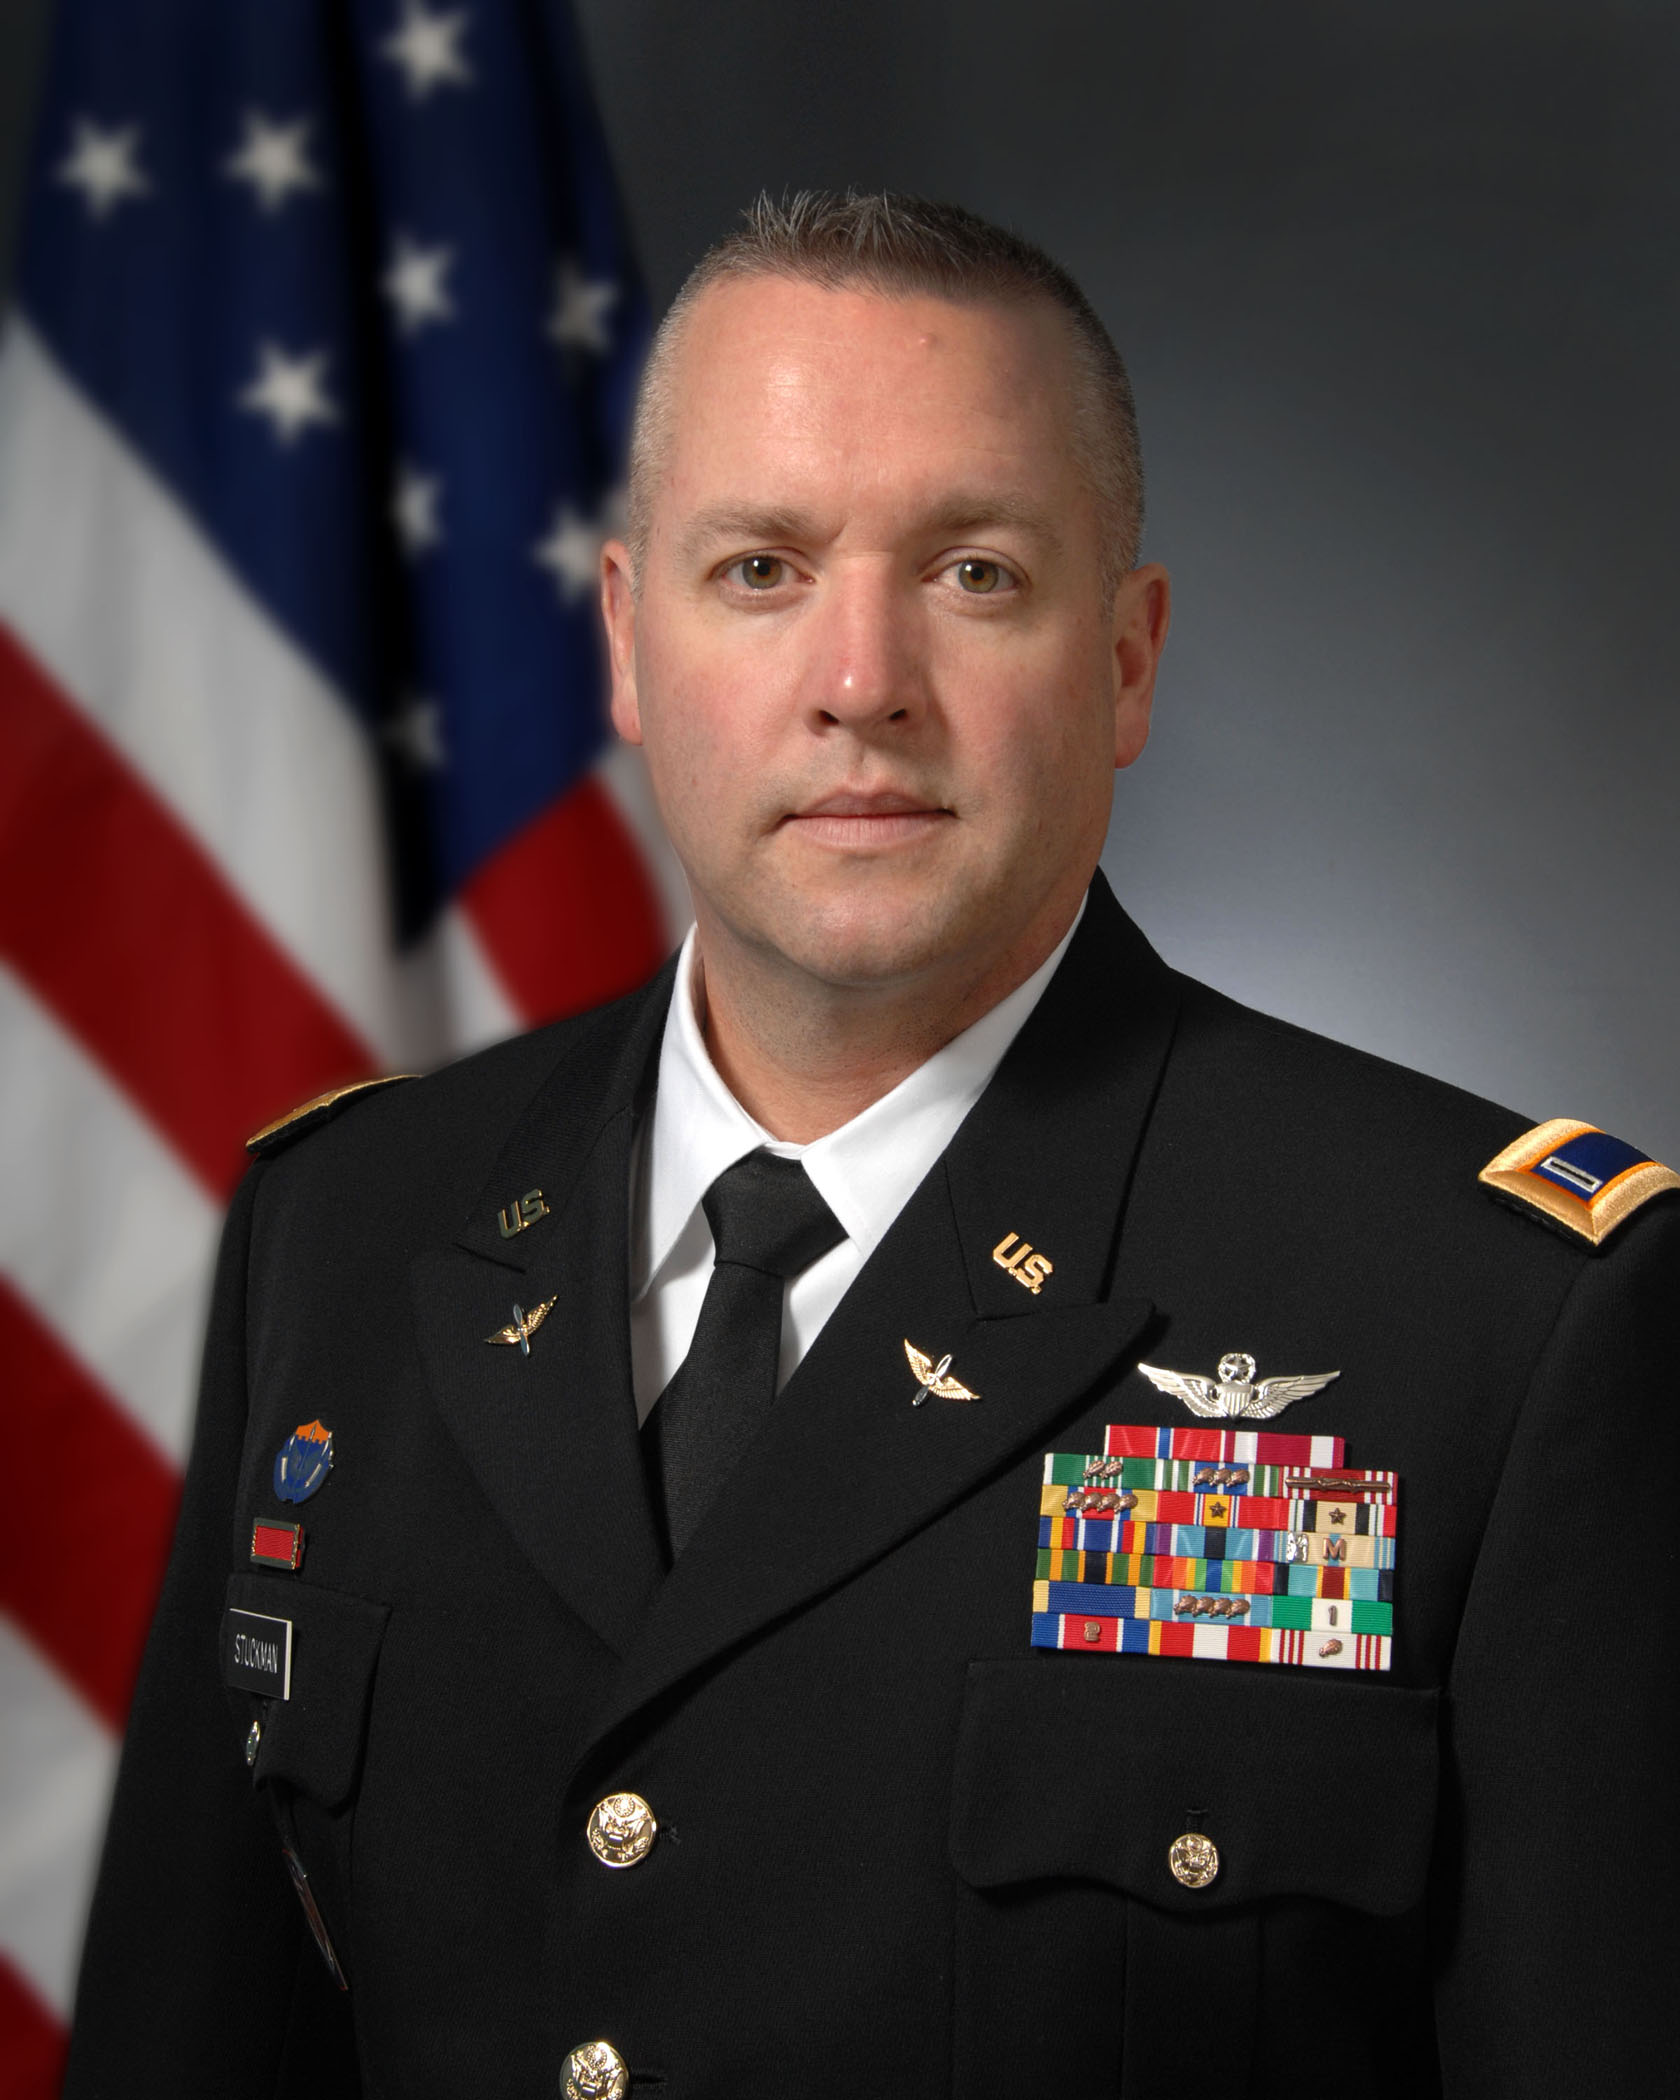 Official photo of By Chief Warrant Officer 5 Jay K. Stuckman, State Command Chief Warrant Officer
